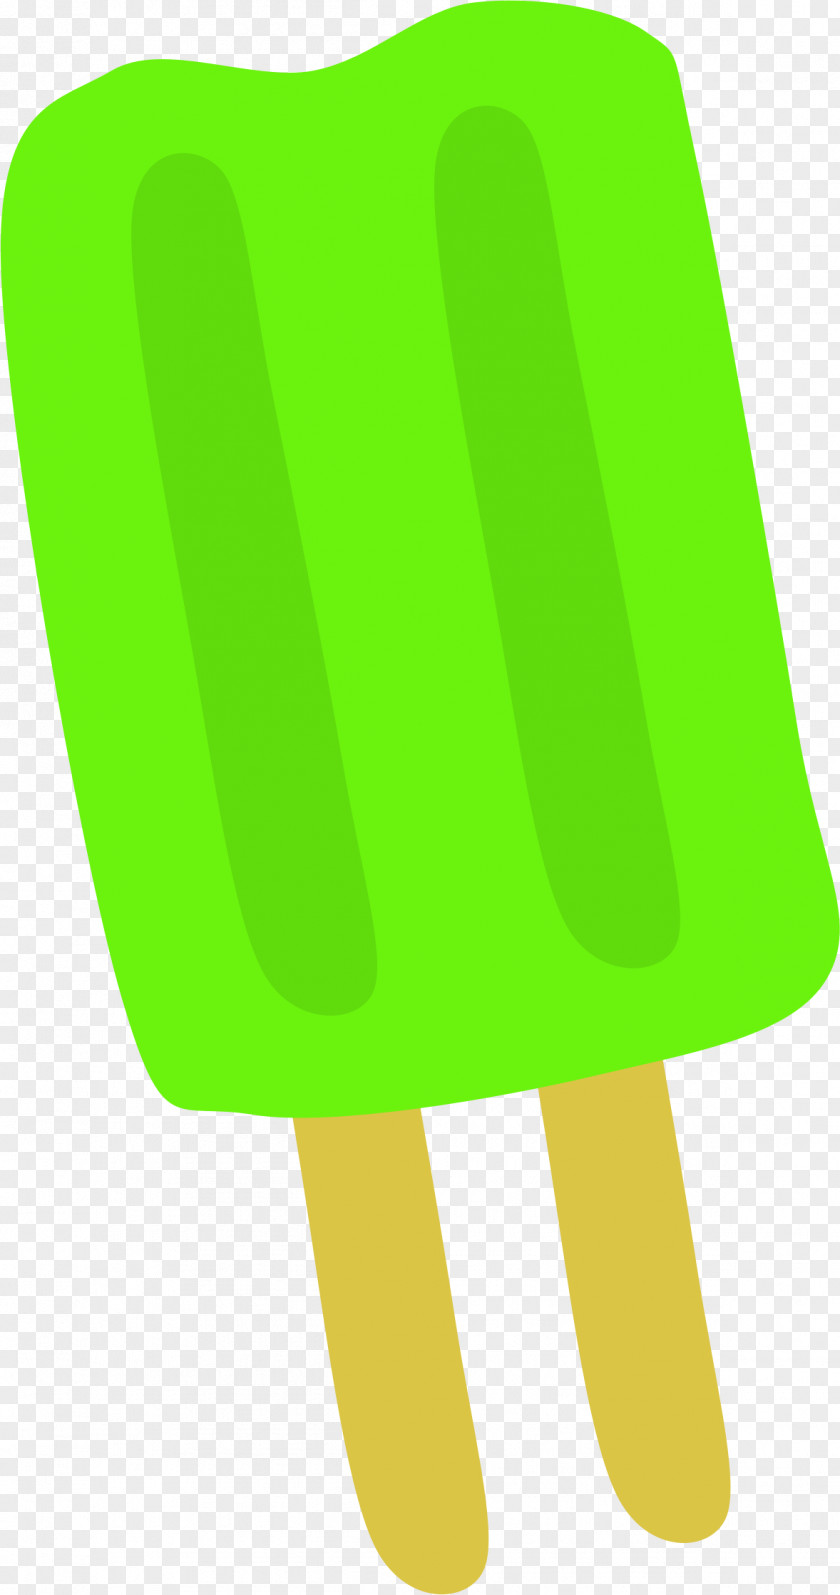 Popsicle Cliparts Ice Cream Pop Clip Art PNG